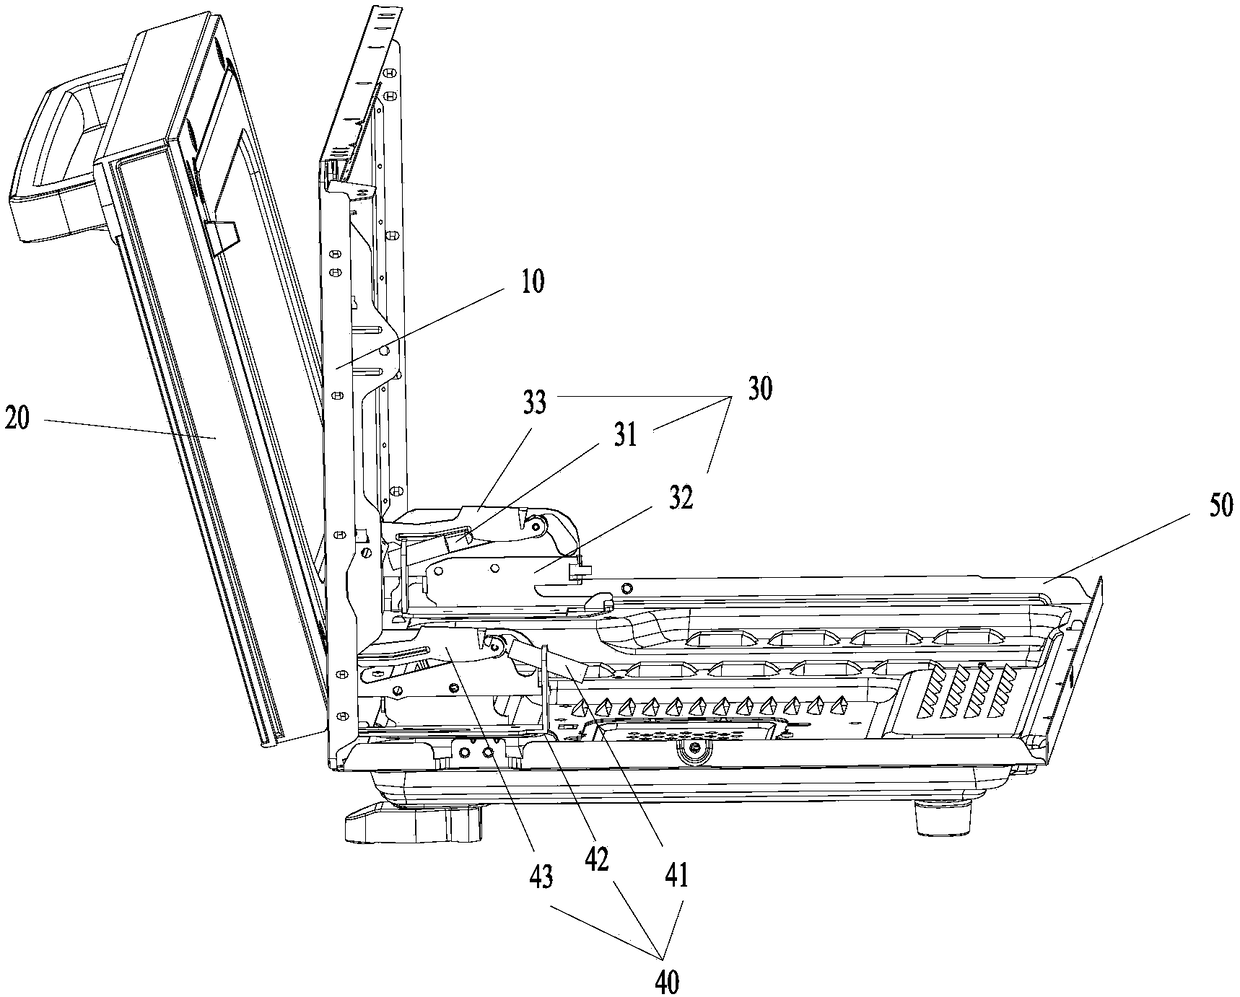 Drop-Down Door Mounting Structures and Cooking Appliances